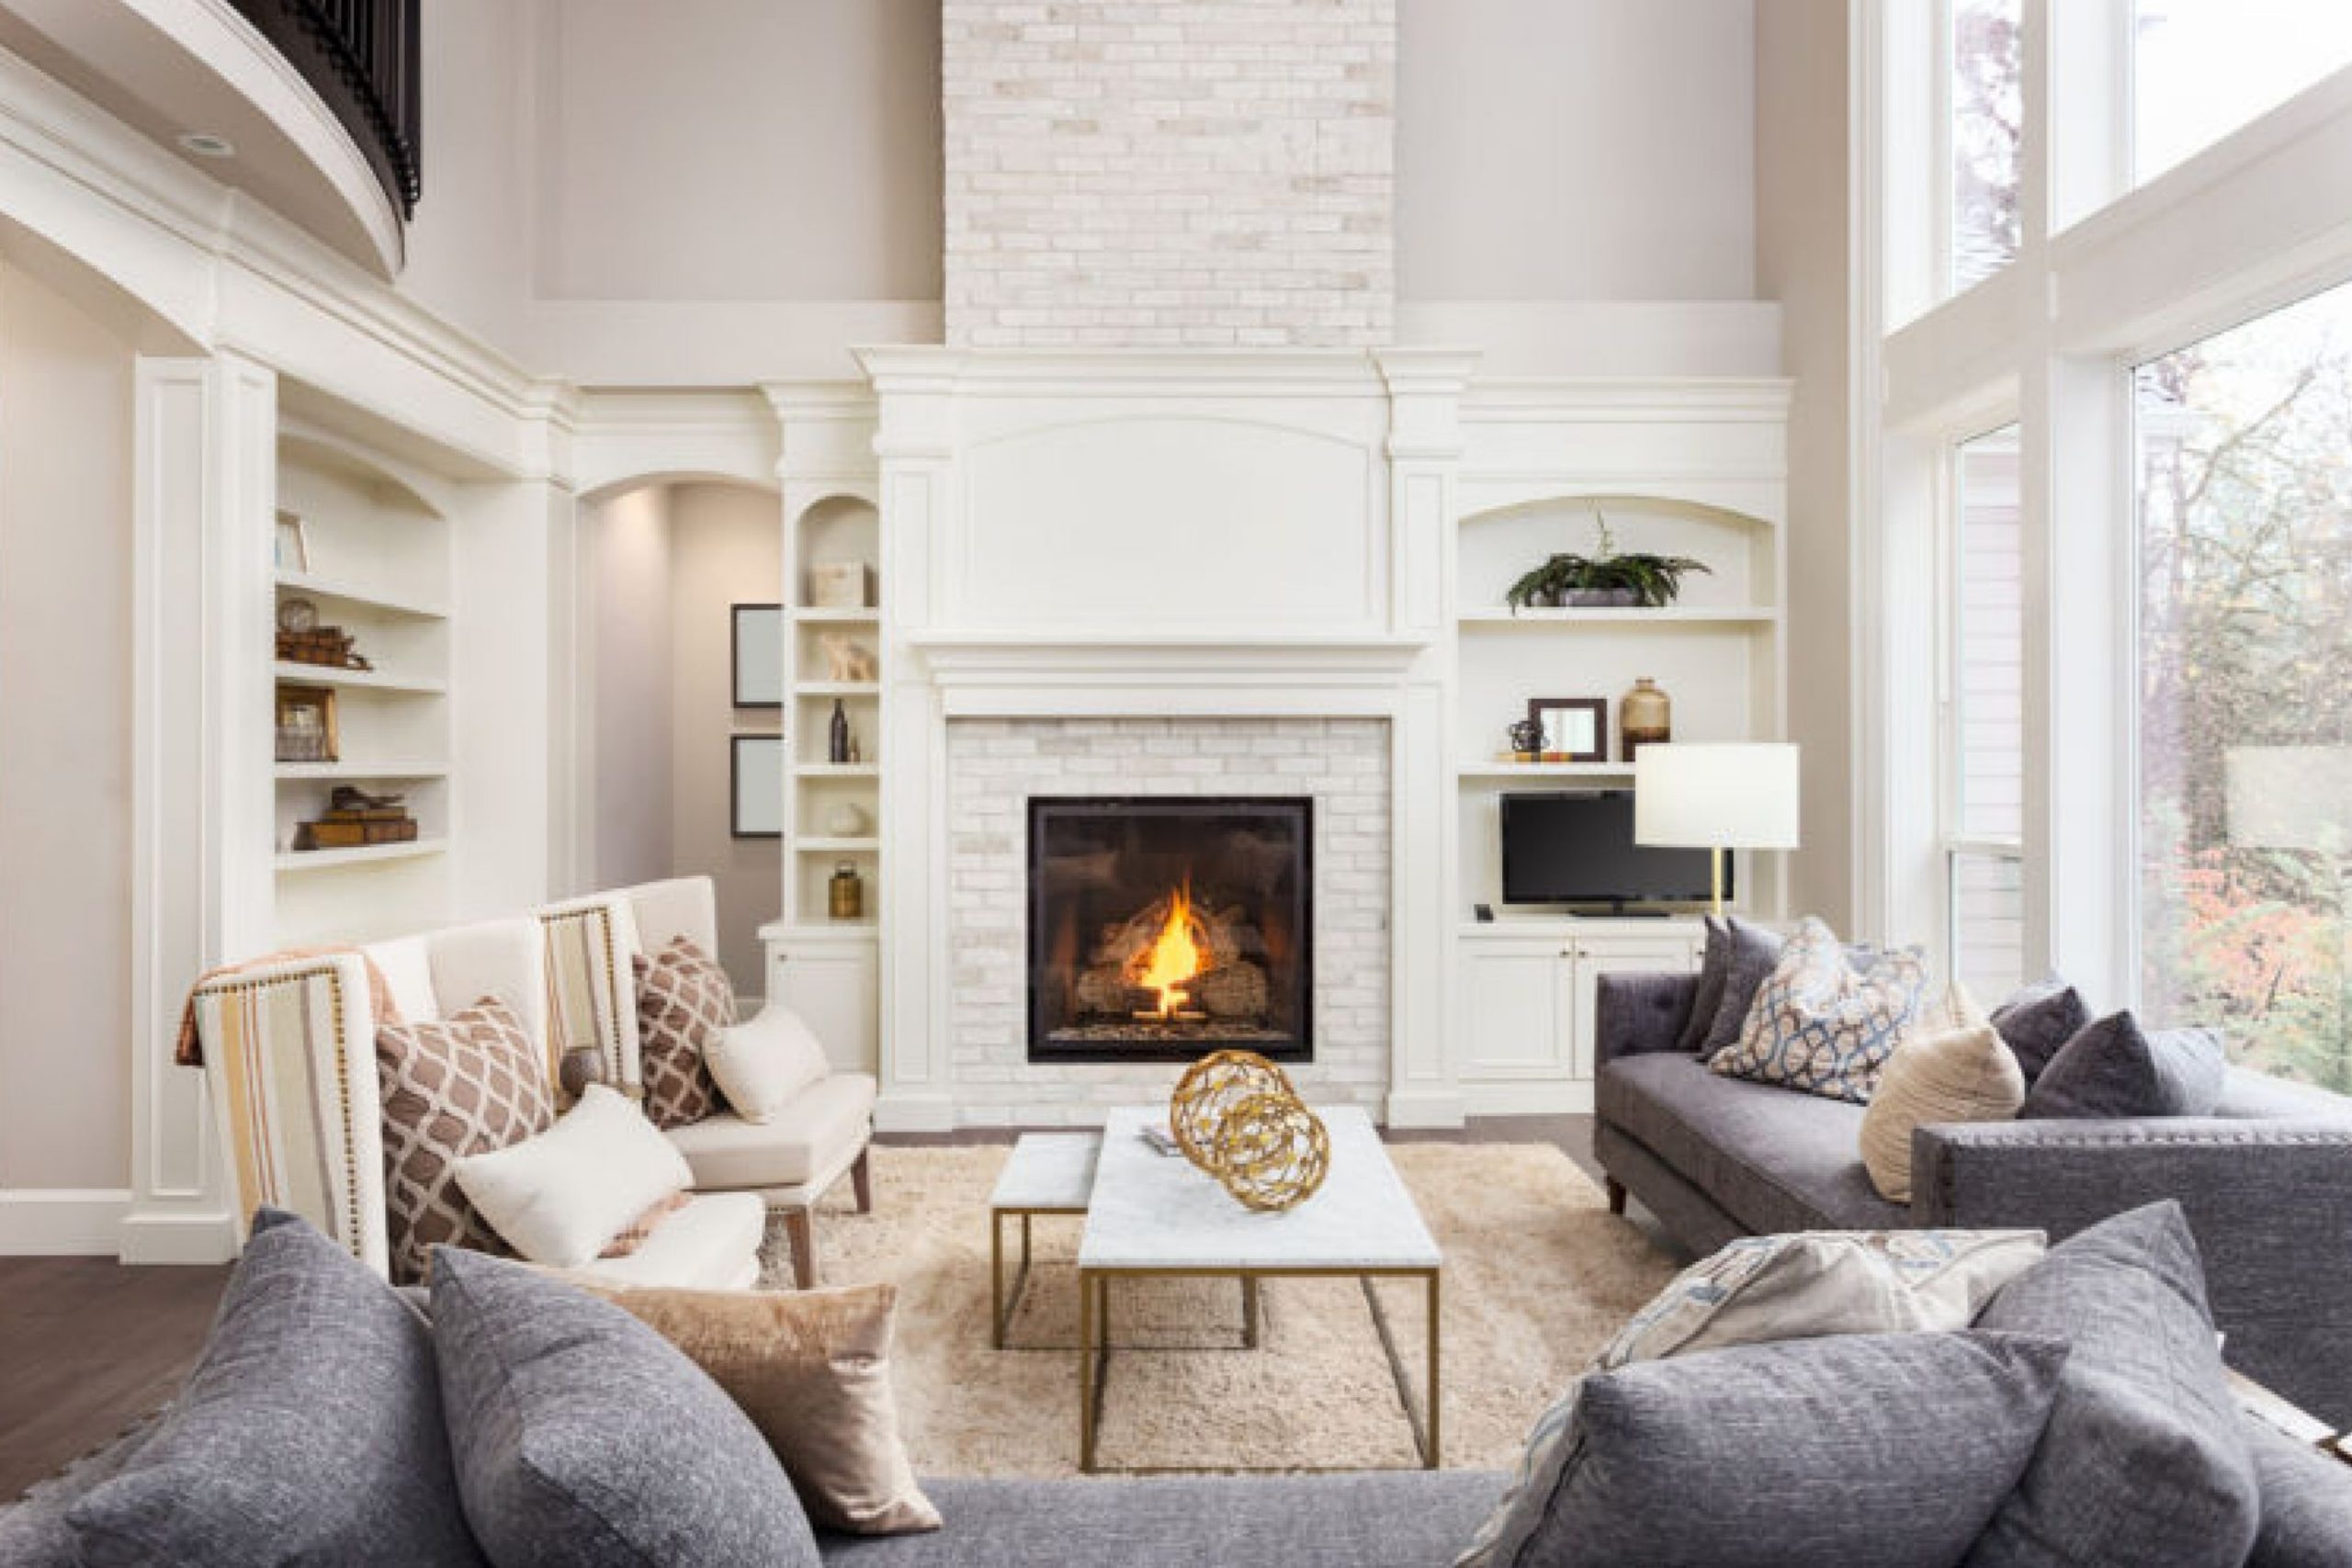 Toque White SW 7003 by Sherwin Williams